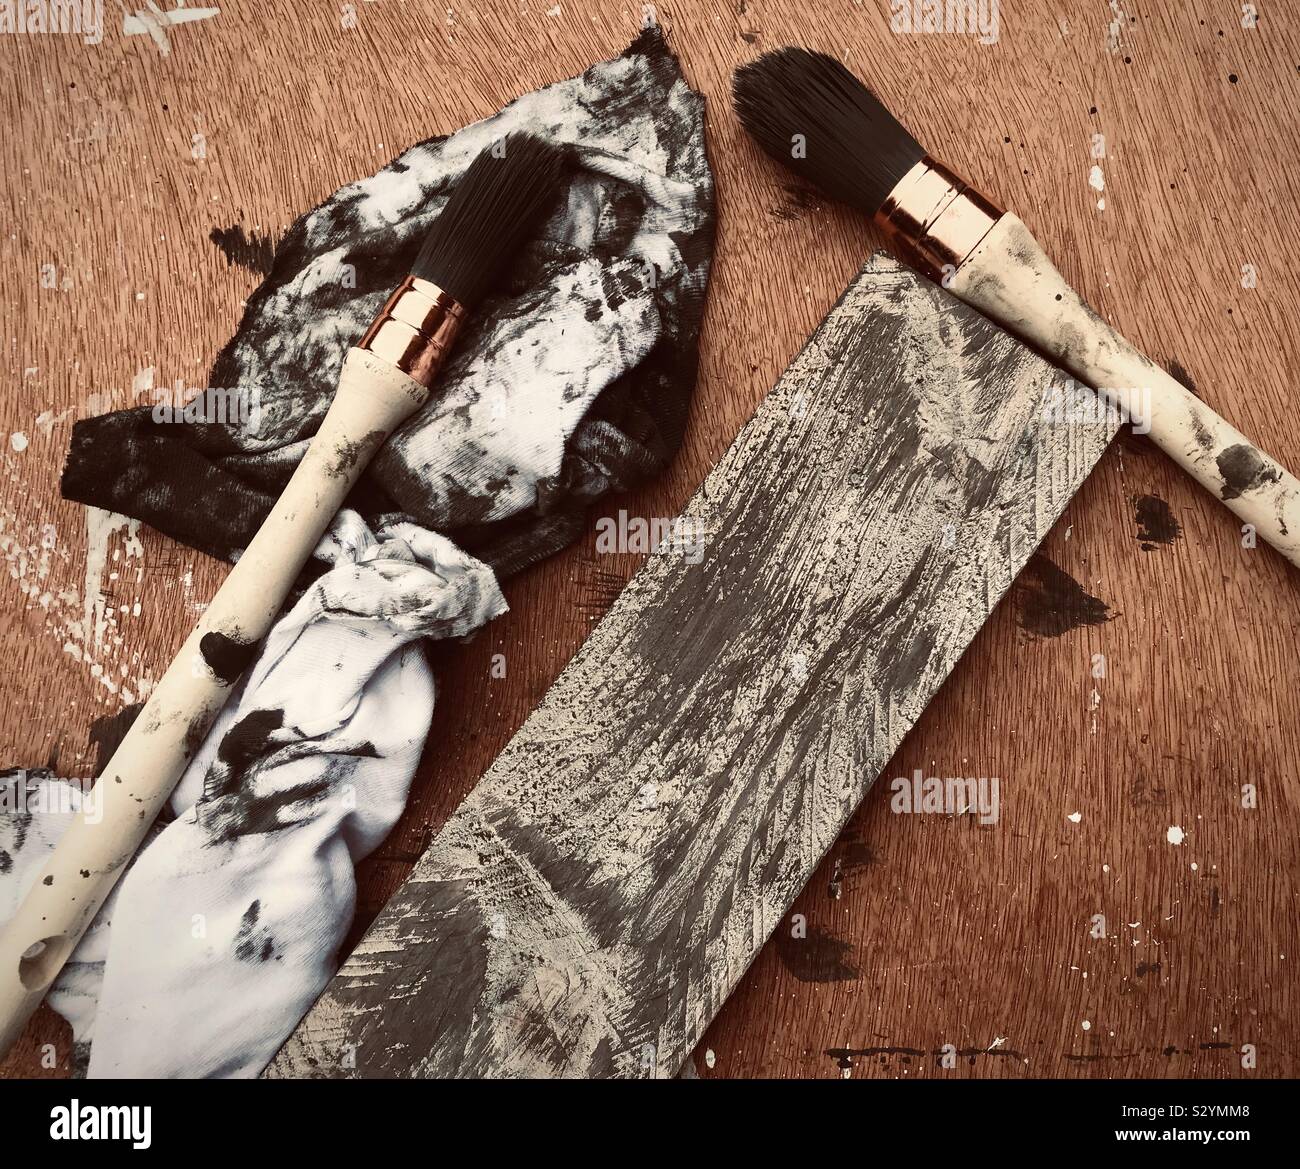 Chalk paint brushes, rags and a painted piece of pallet wood. Stock Photo